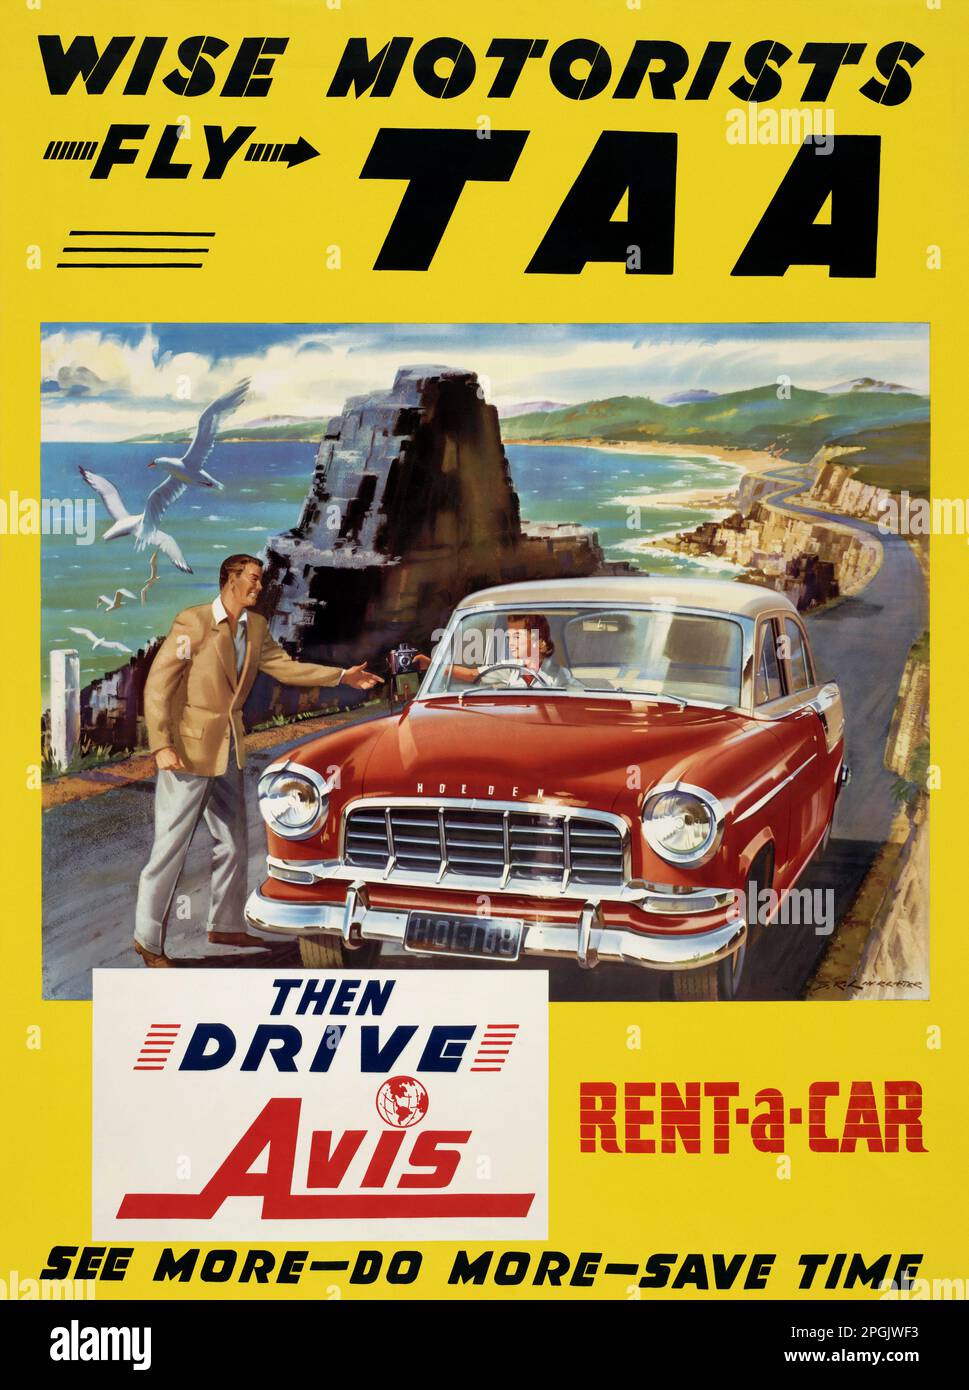 Wise Motorists Fly TAA. Then drive Avis Rent-a-car by Barrie R. Linklater (1931-2017). Poster published in the 1950s in Australia. Stock Photo